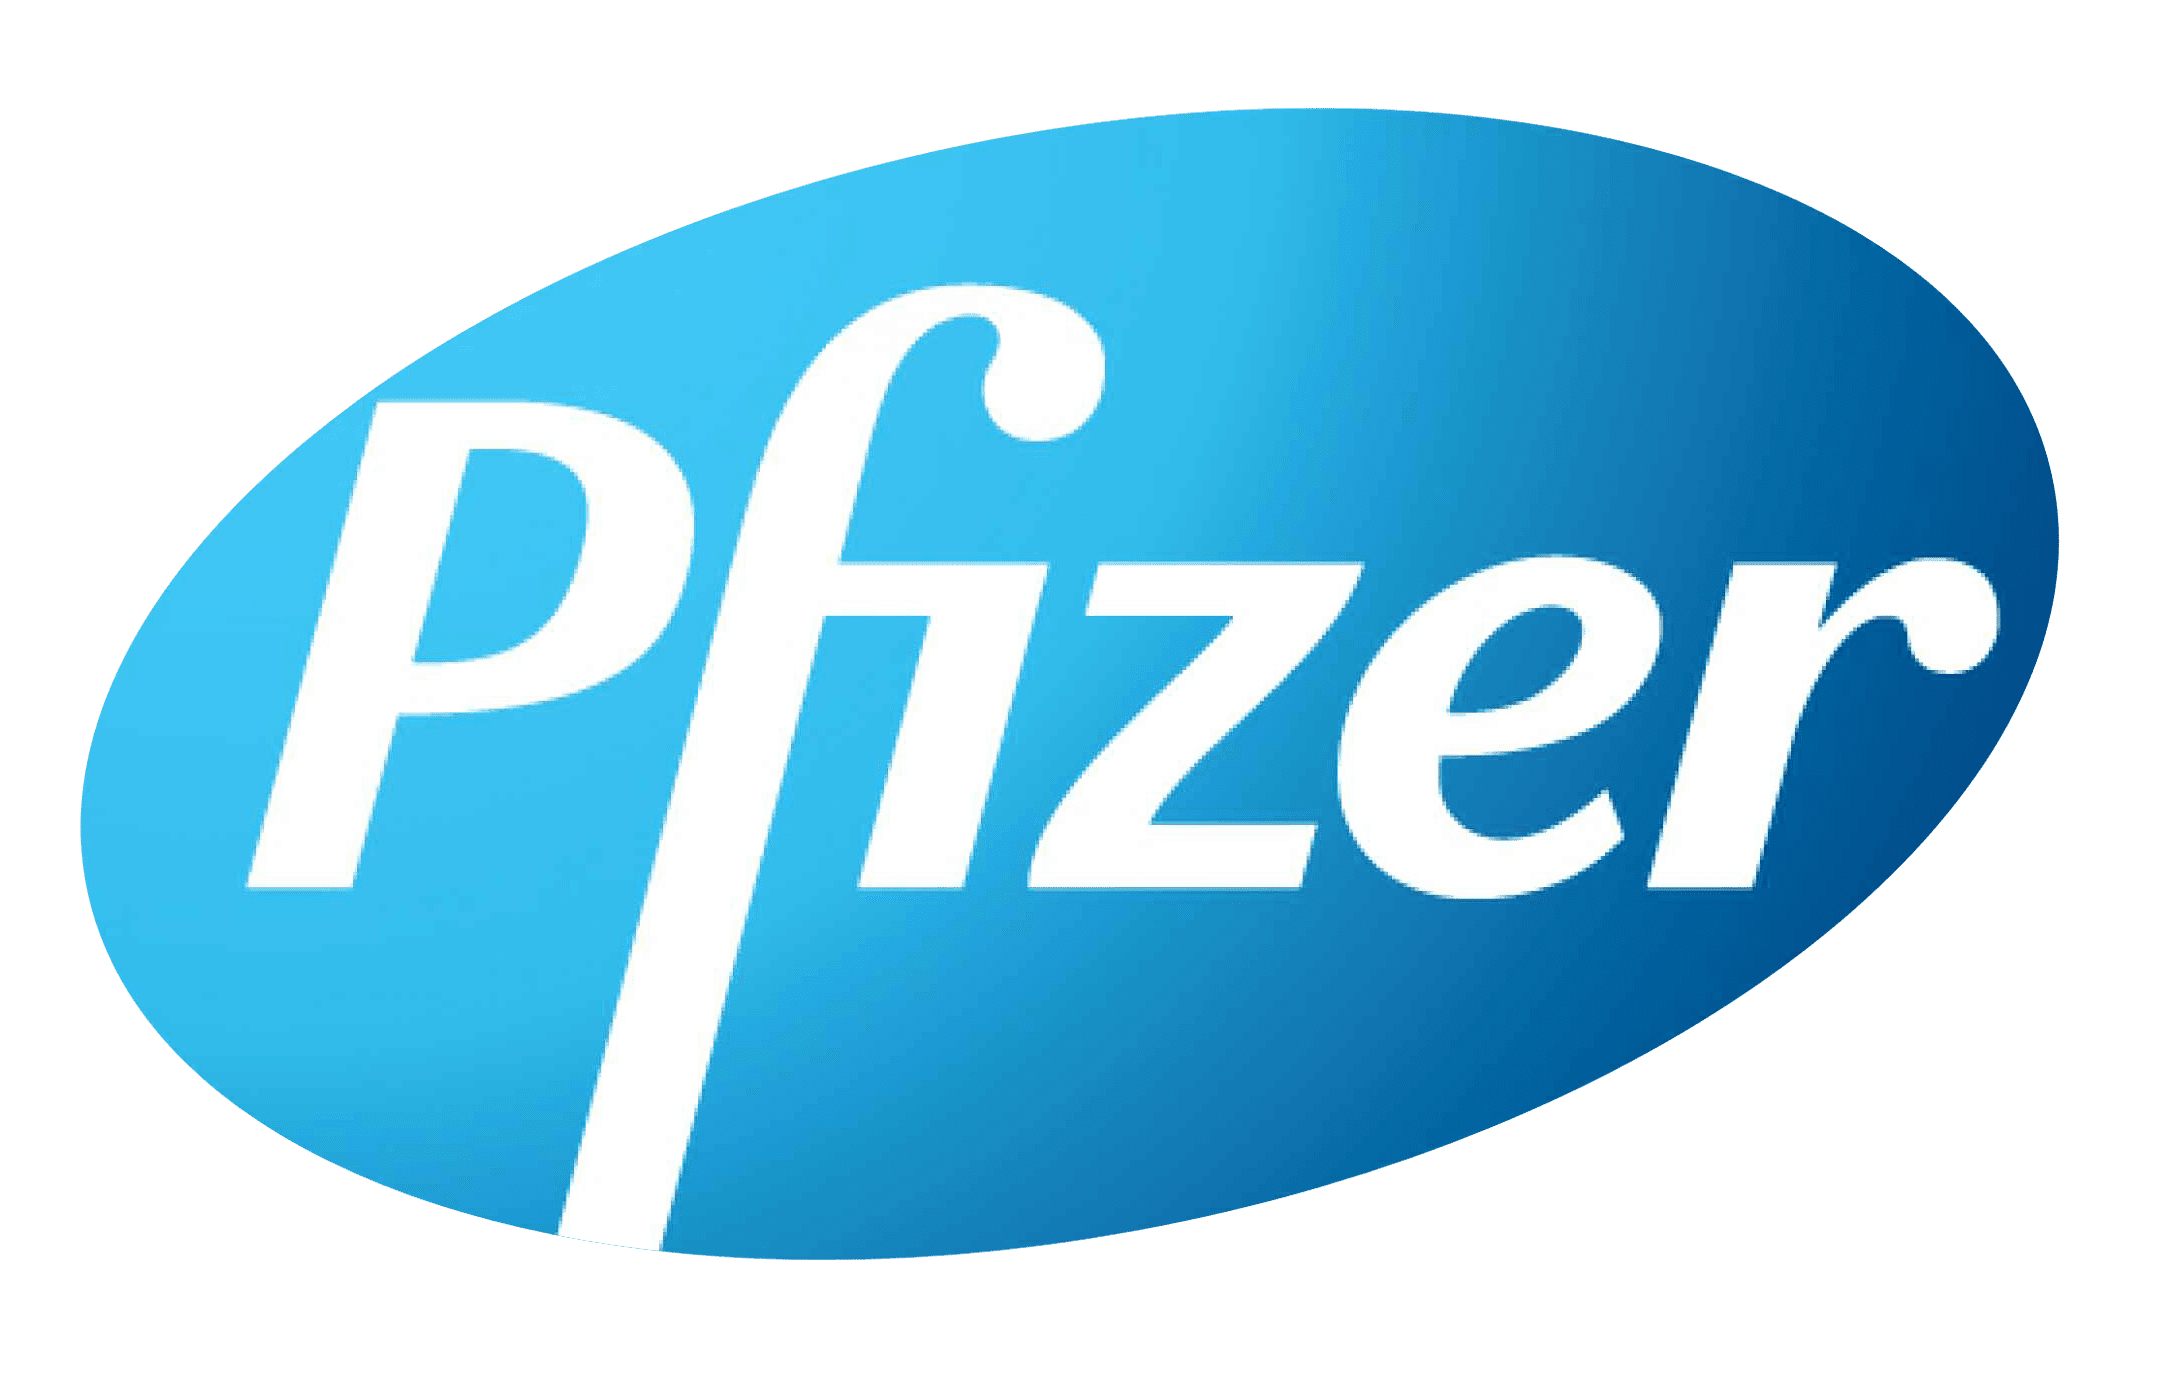 Pfizer Products